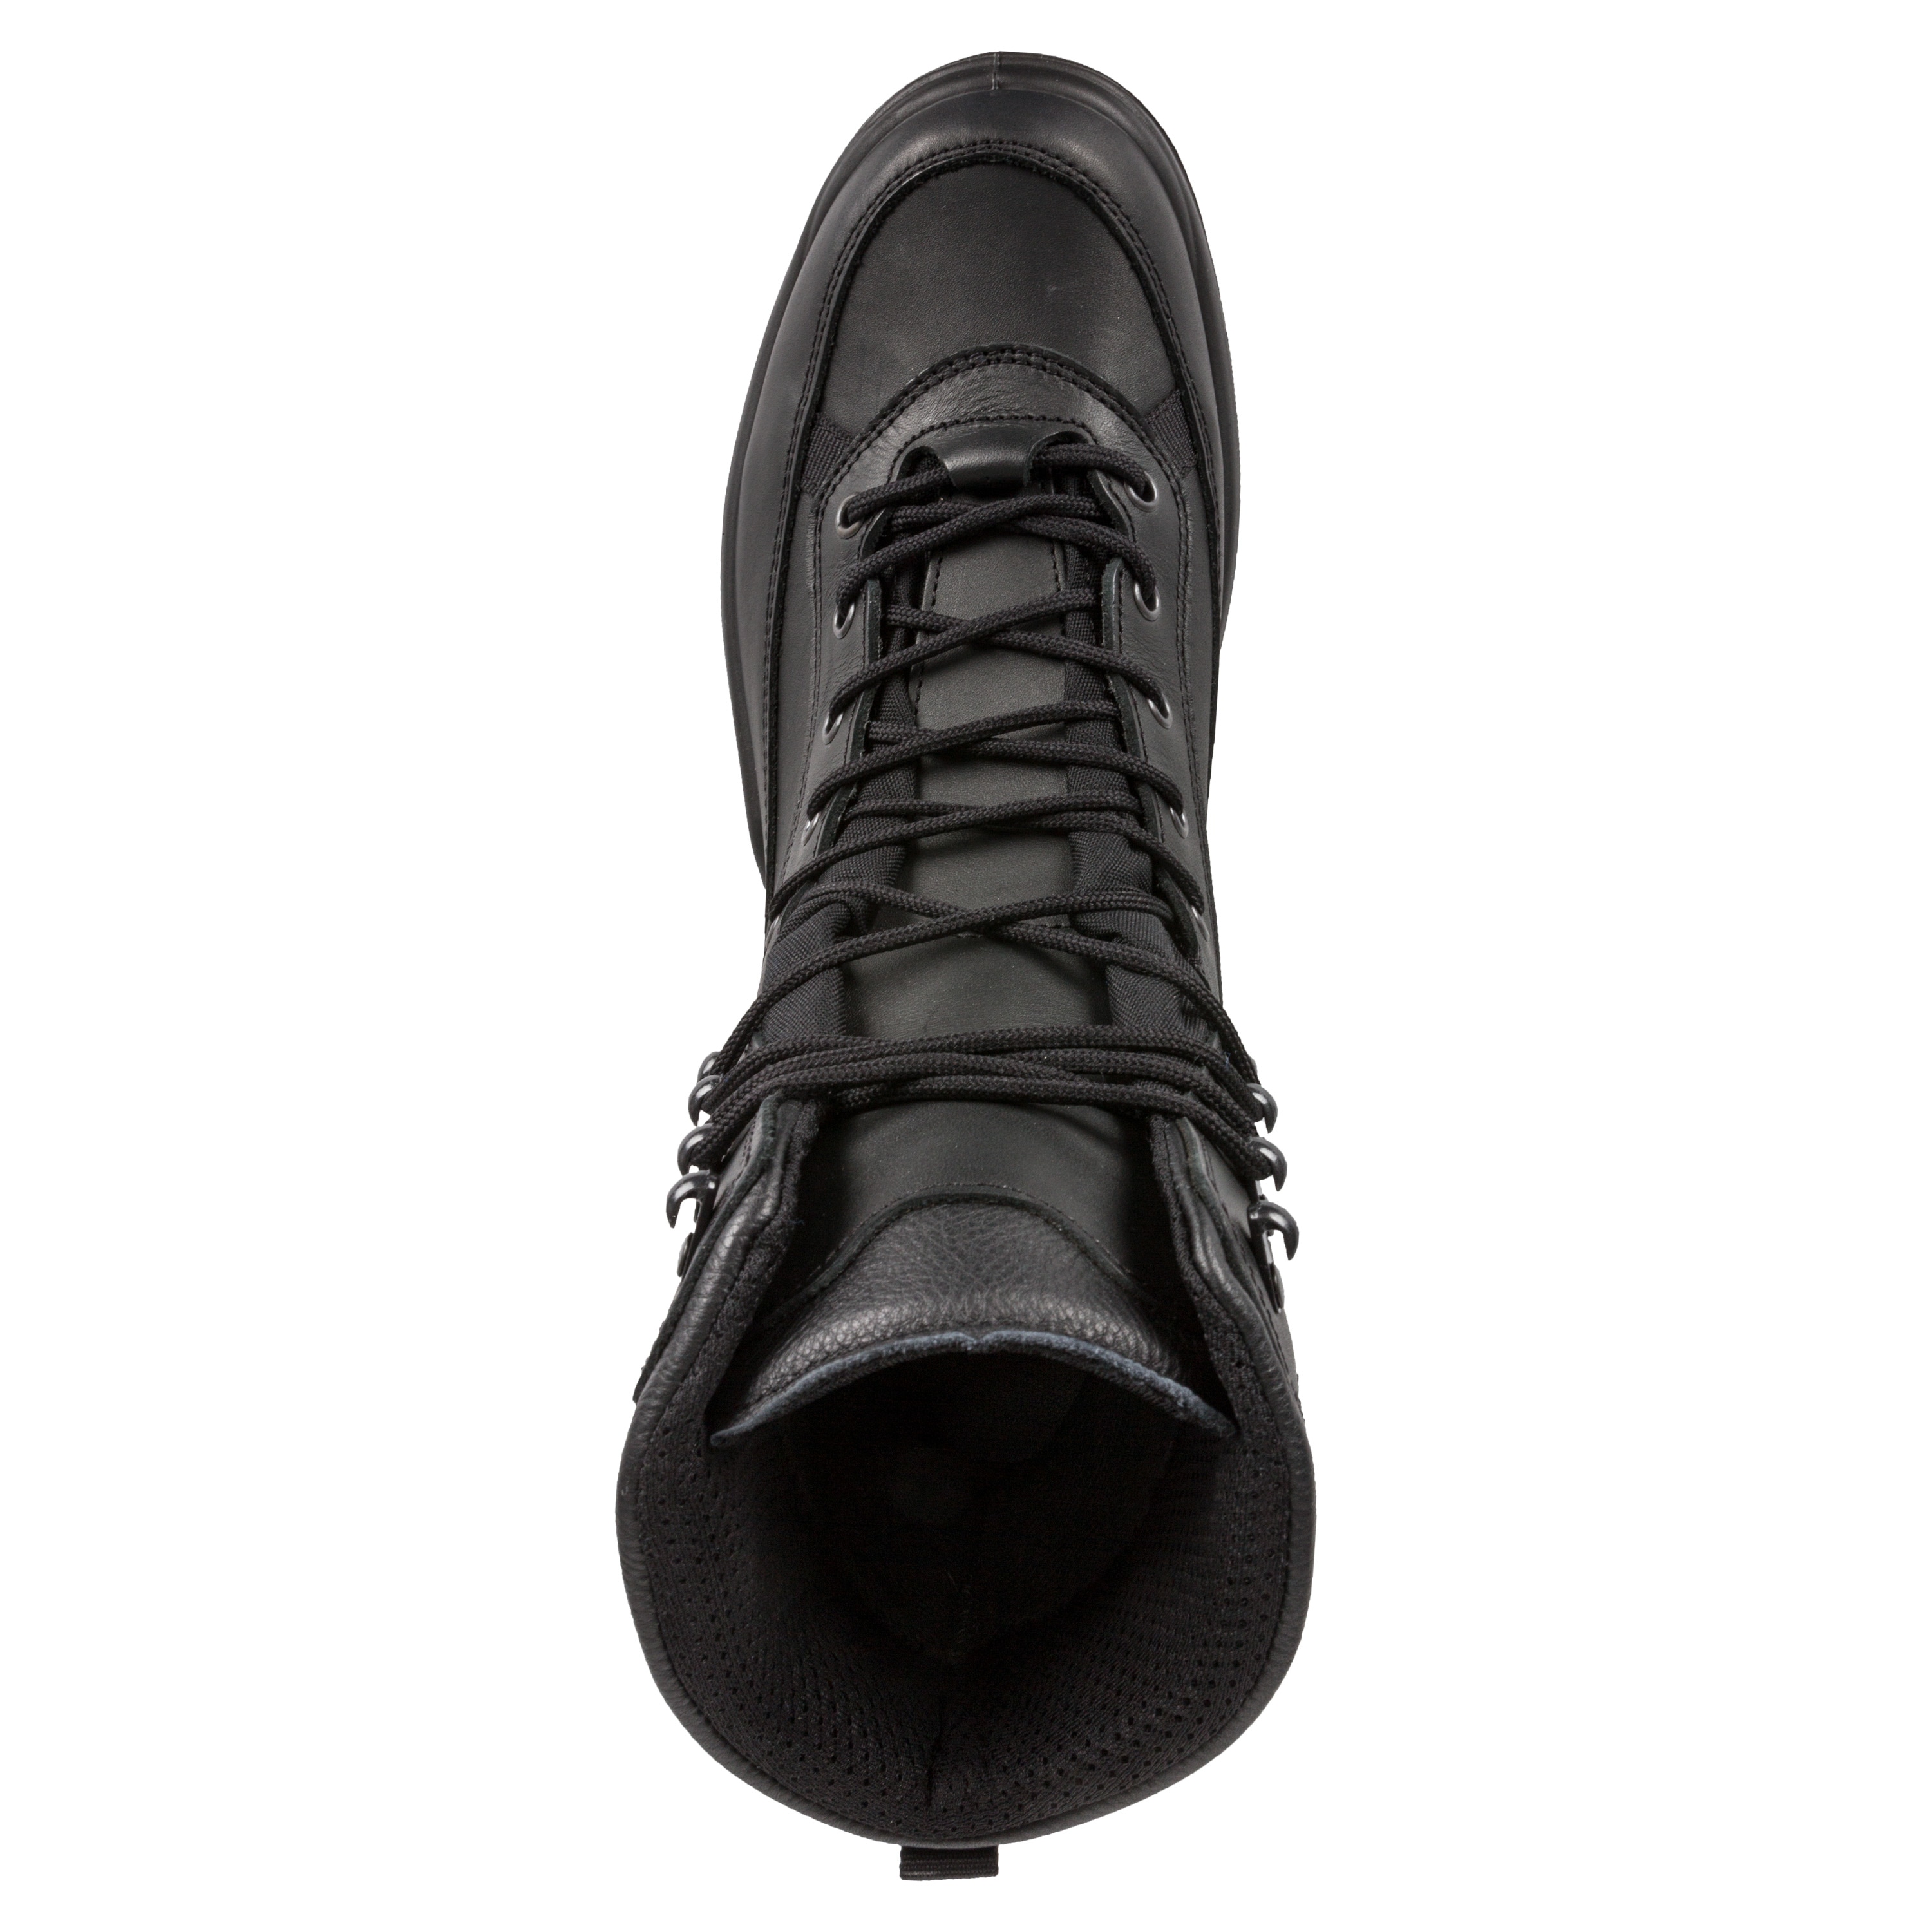 Democratie Teleurstelling stad Purchase the LOWA Boots Recon GTX TF black by ASMC